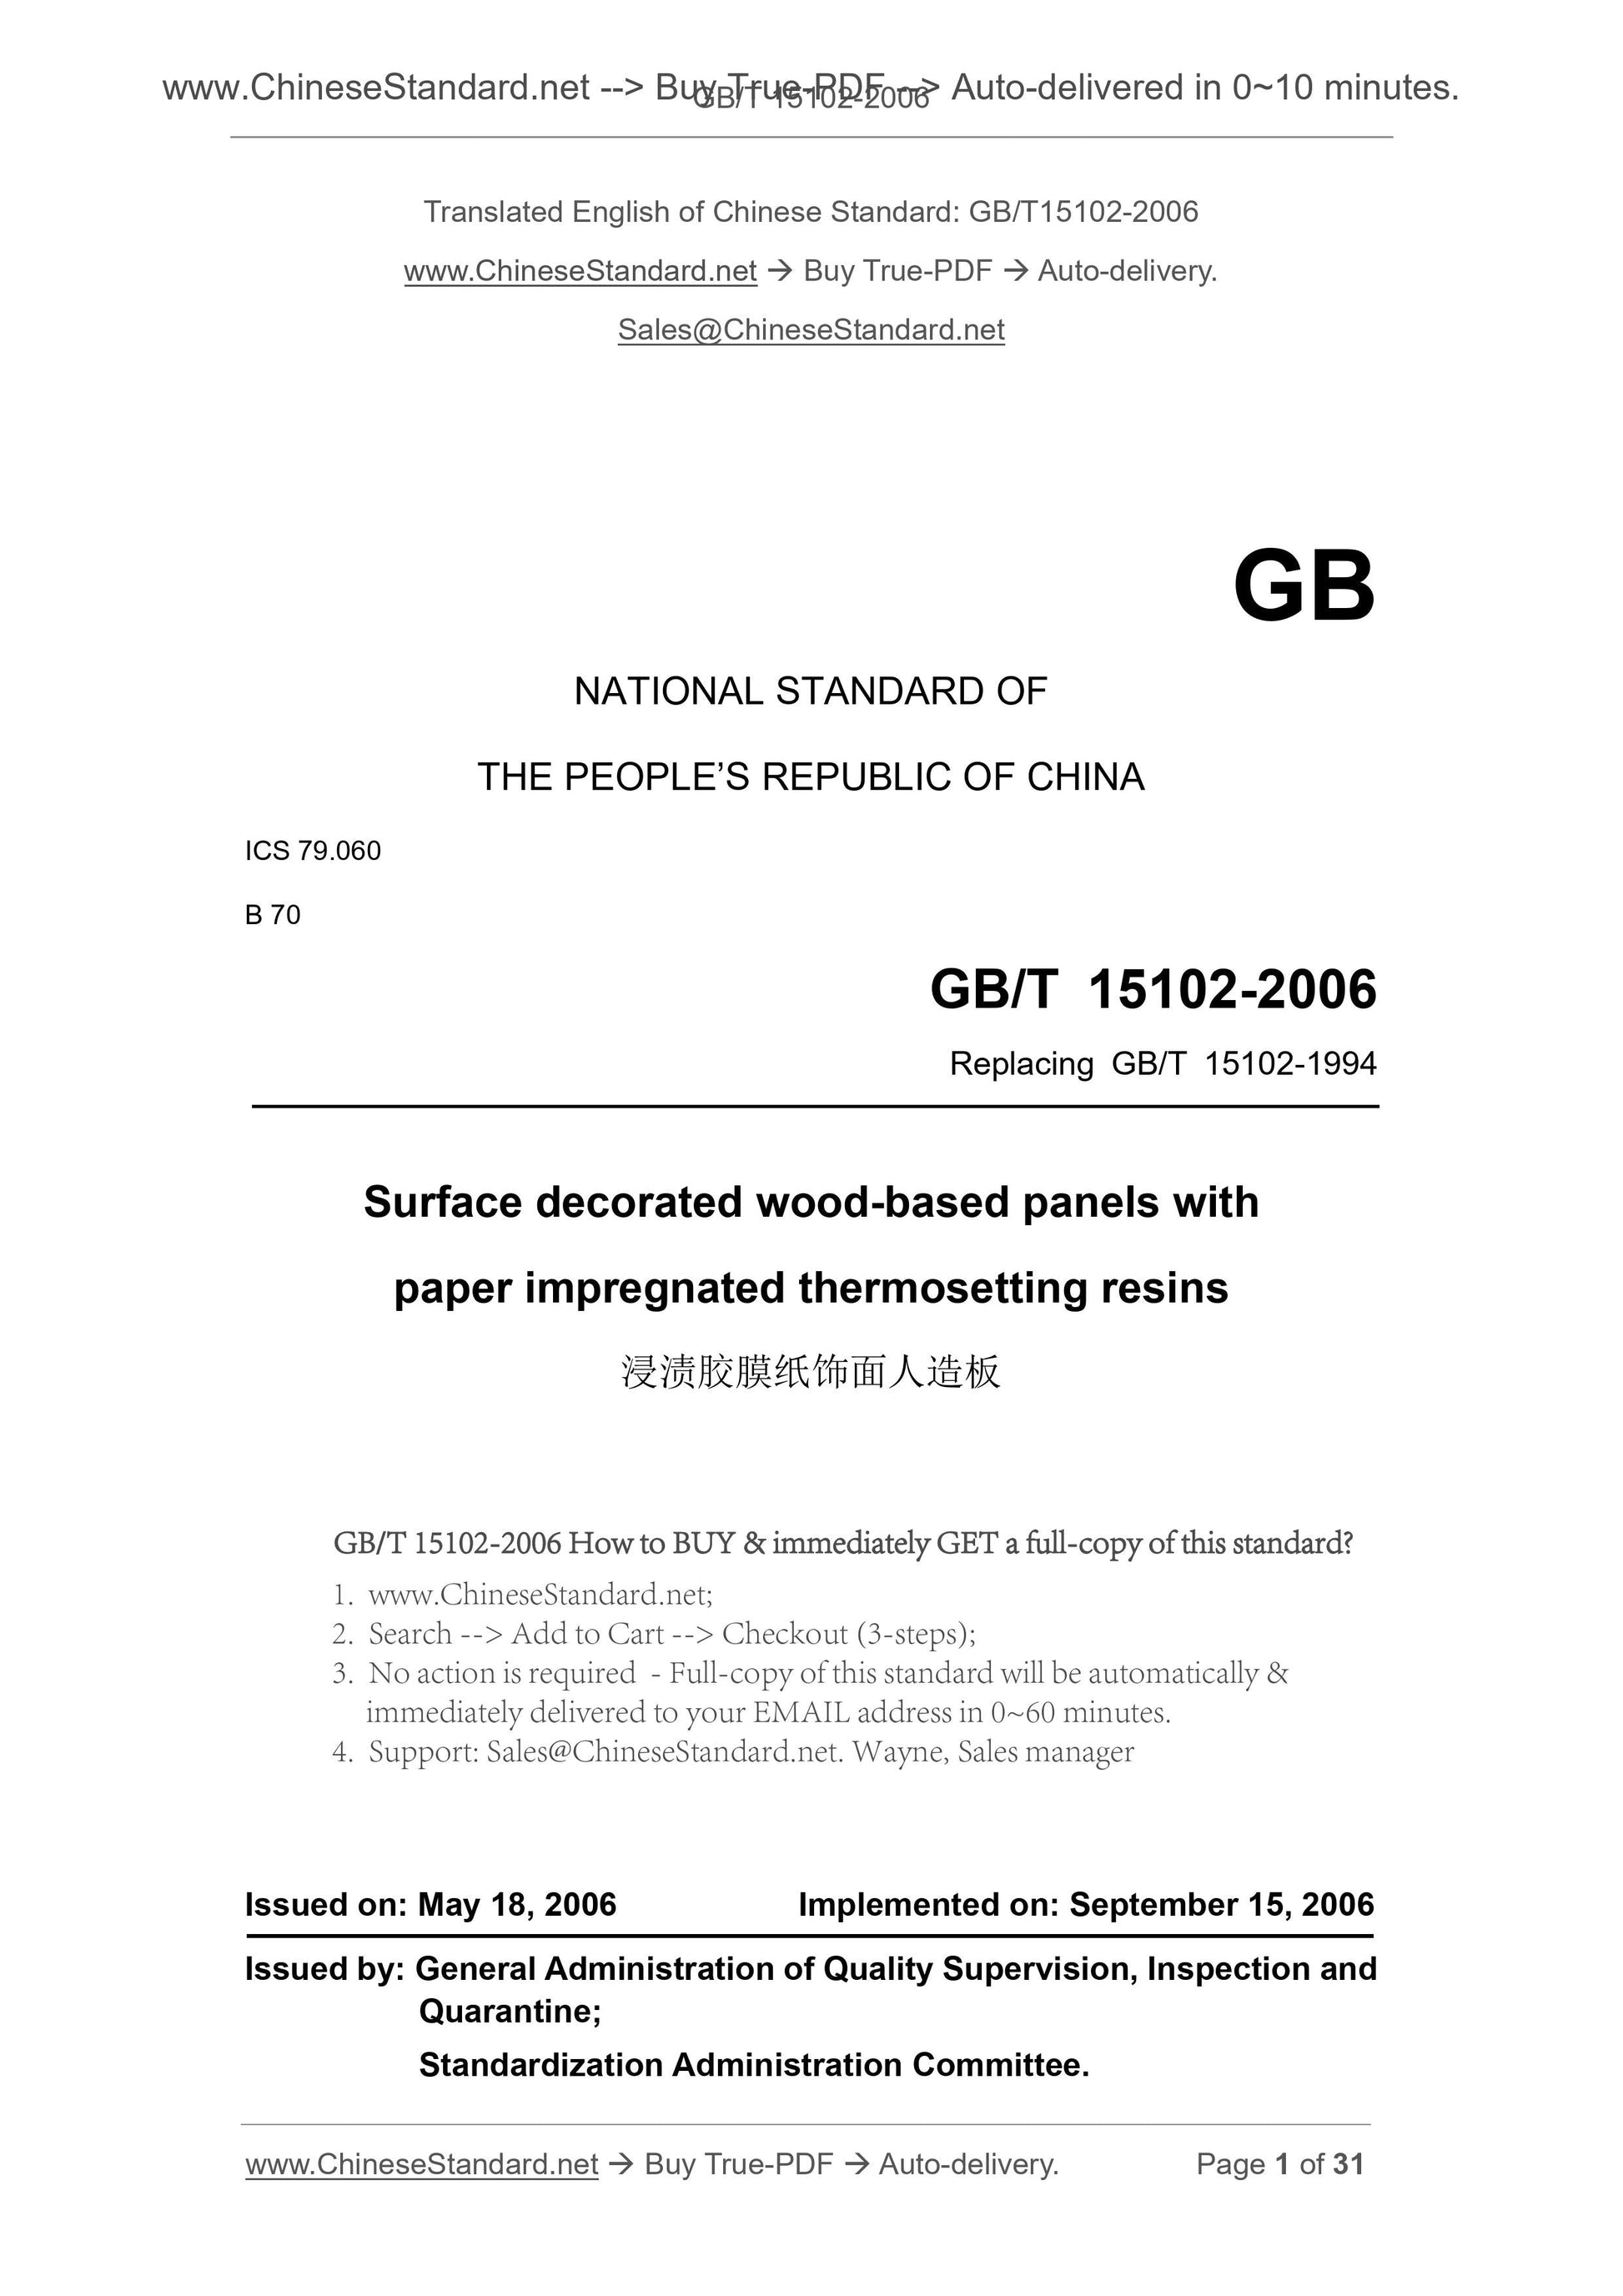 GB/T 15102-2006 Page 1